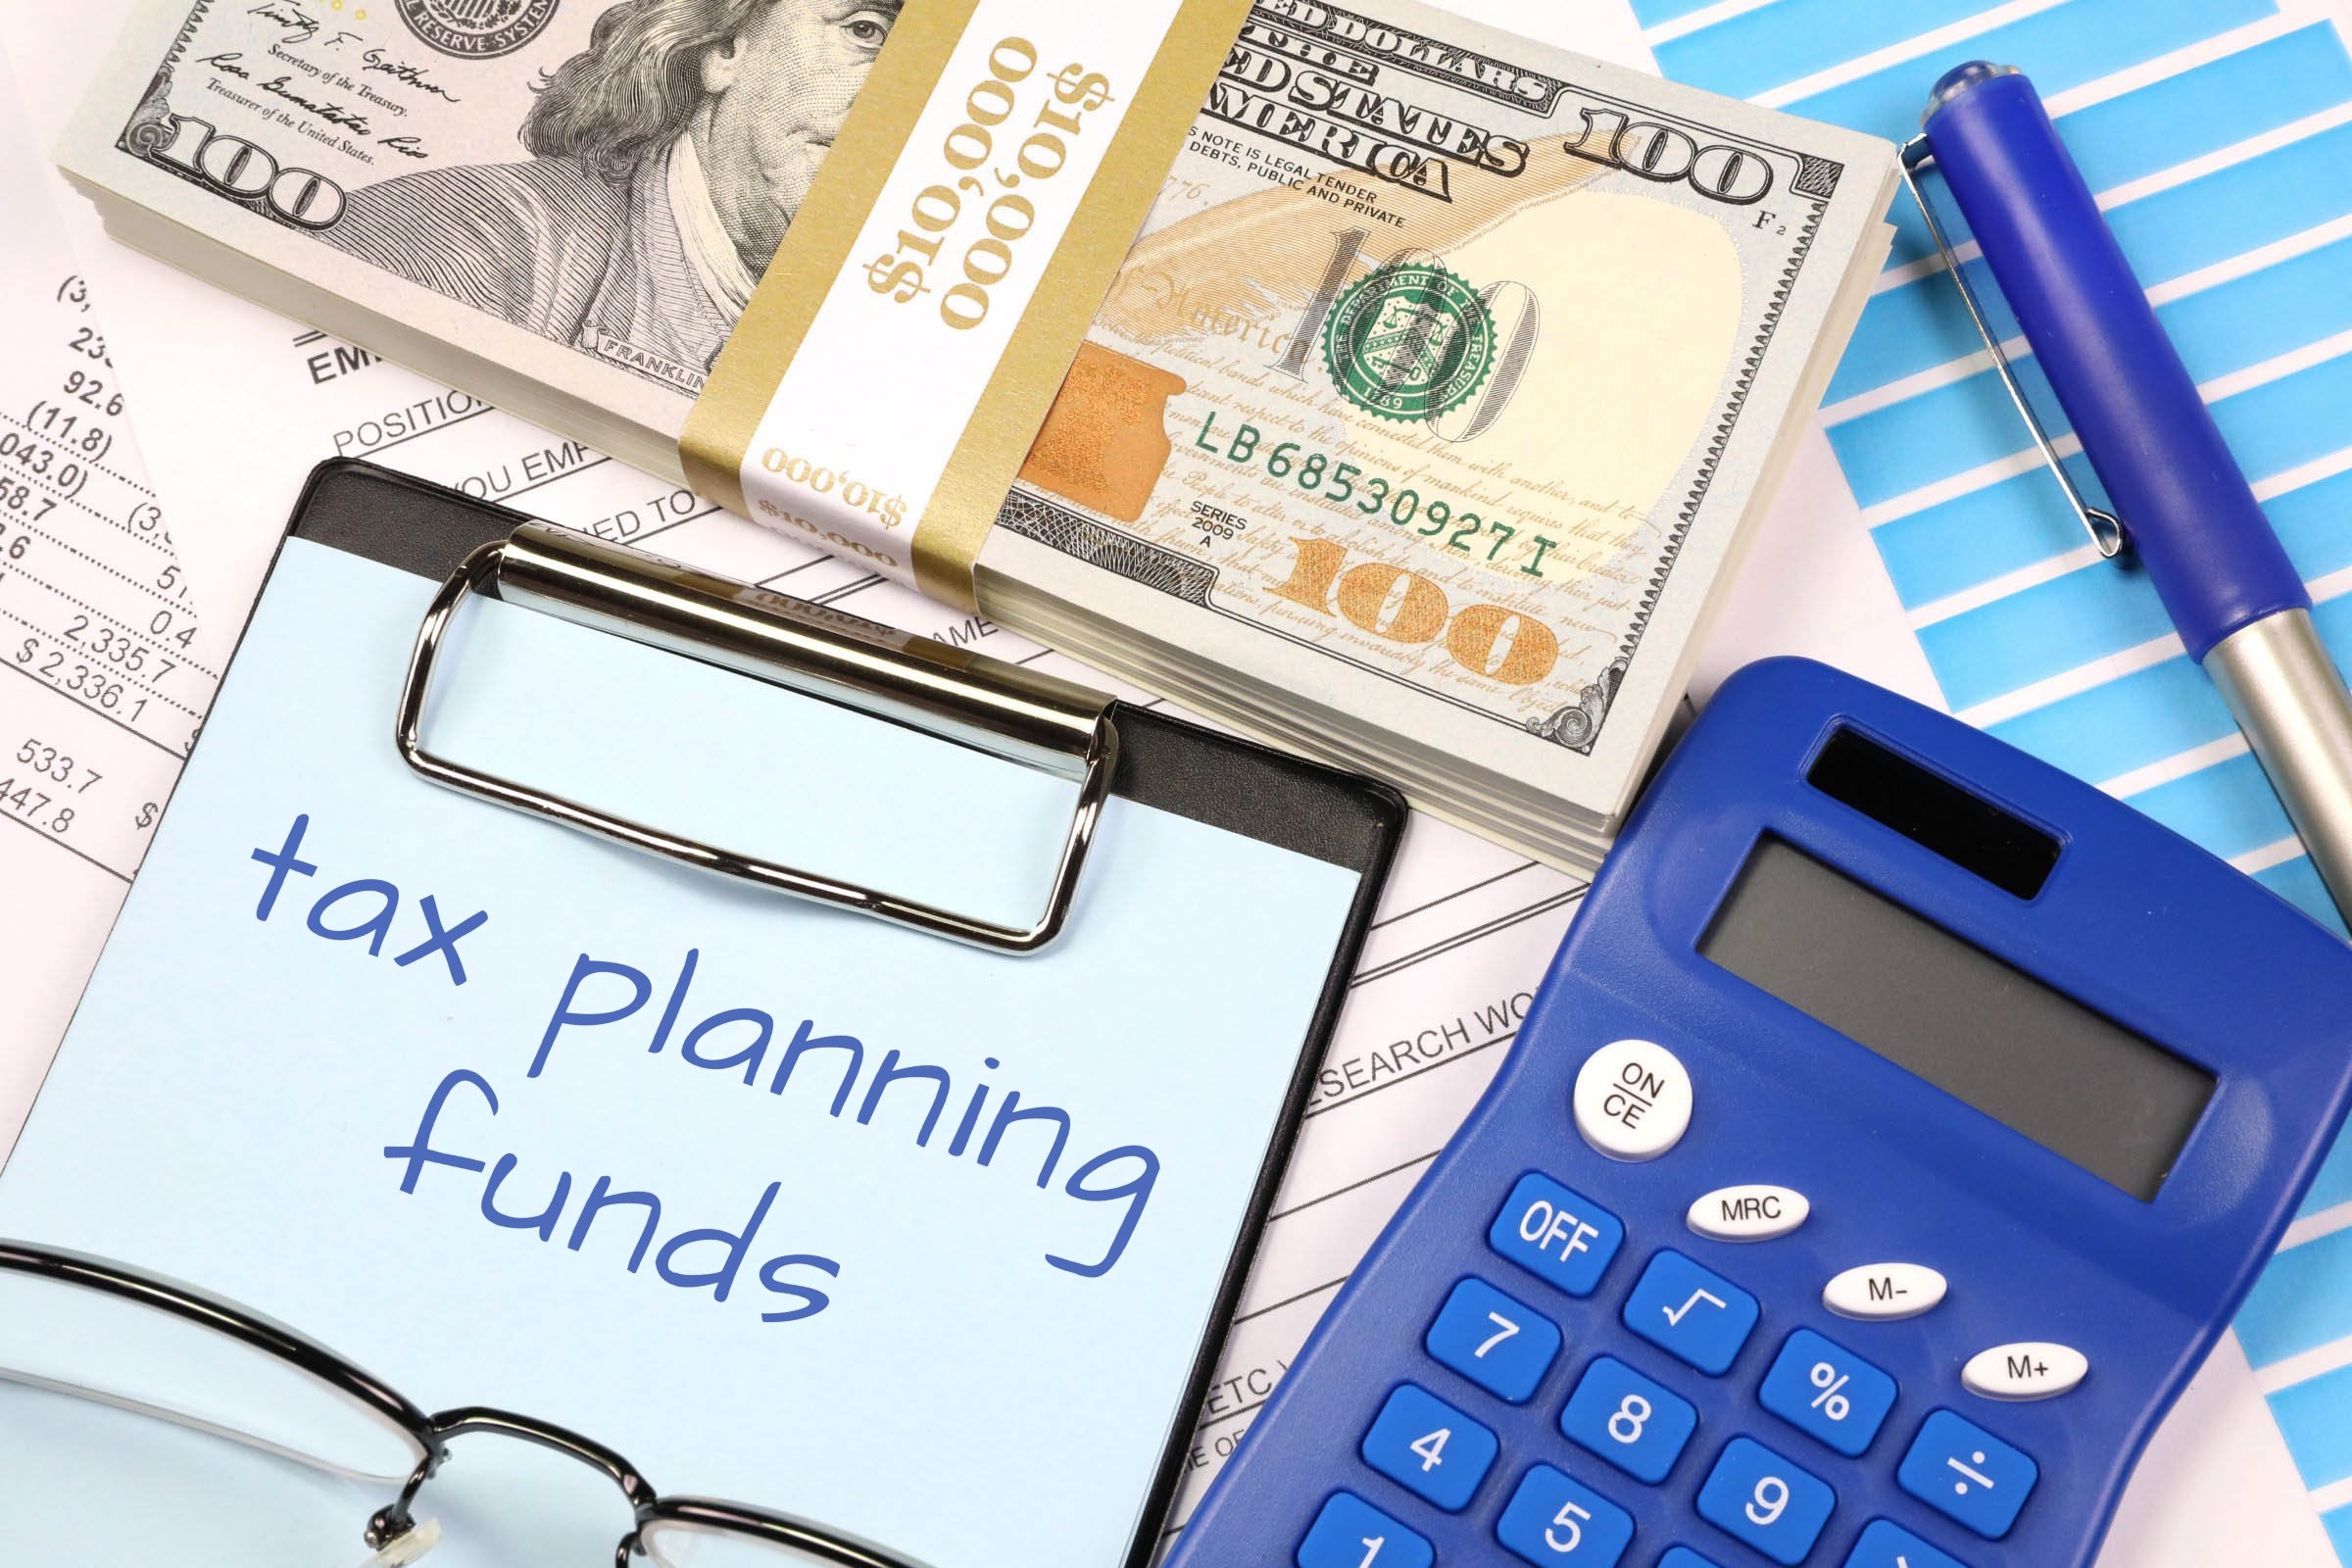 Tax Planning Funds